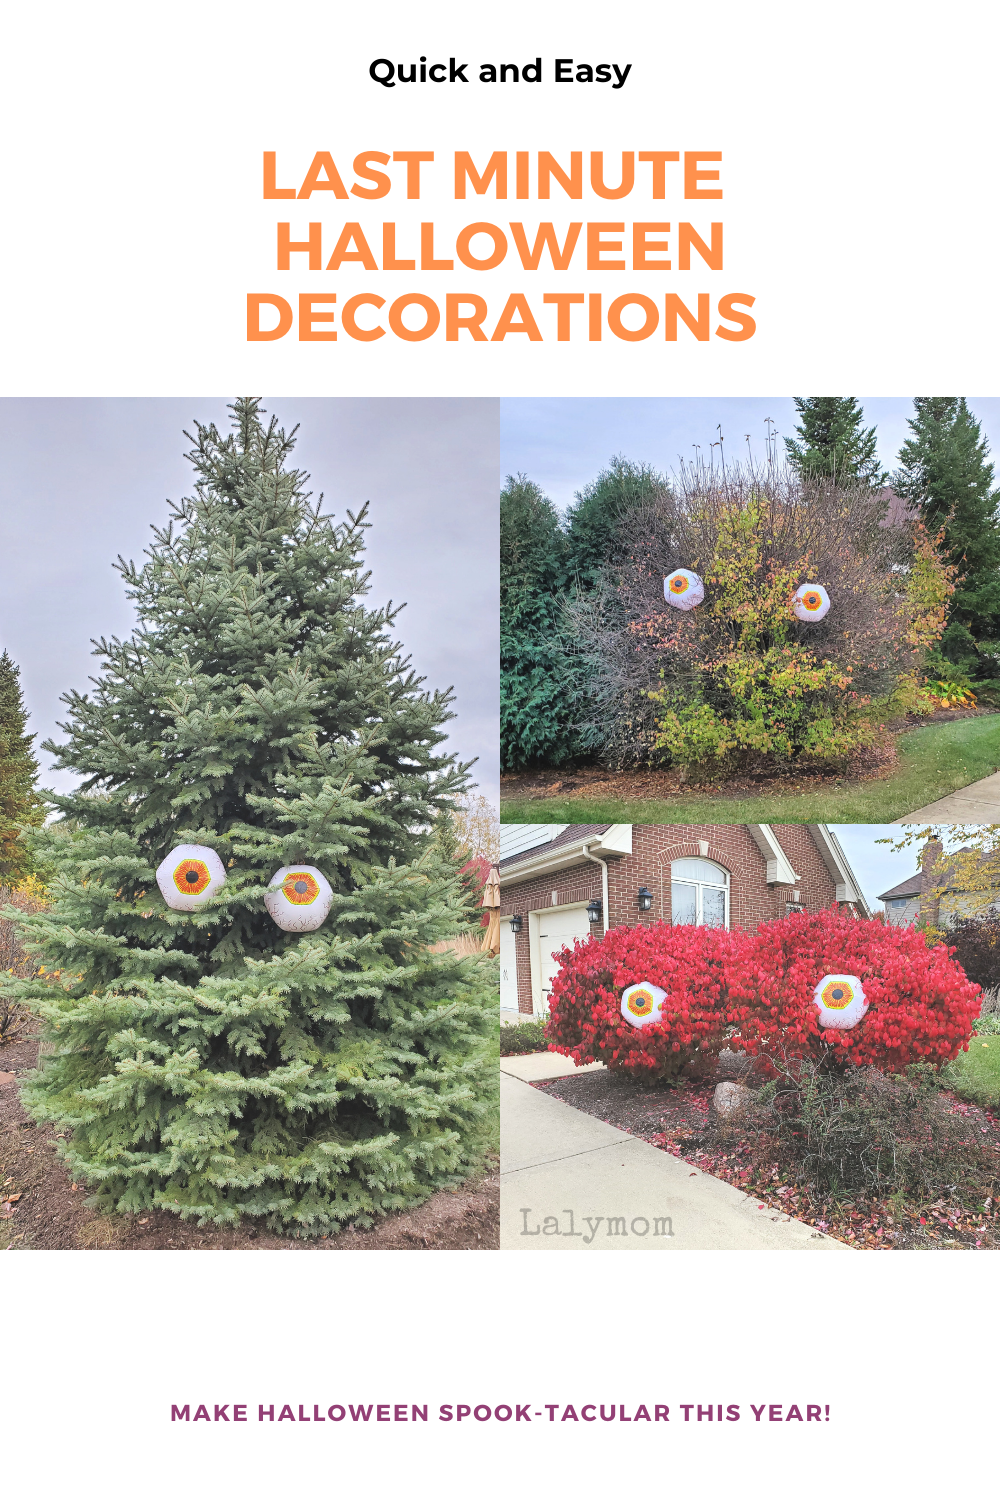 Trees and bushes with inflatable eyeball beach balls, perfect for a funny Outdoor Halloween Decoration Idea